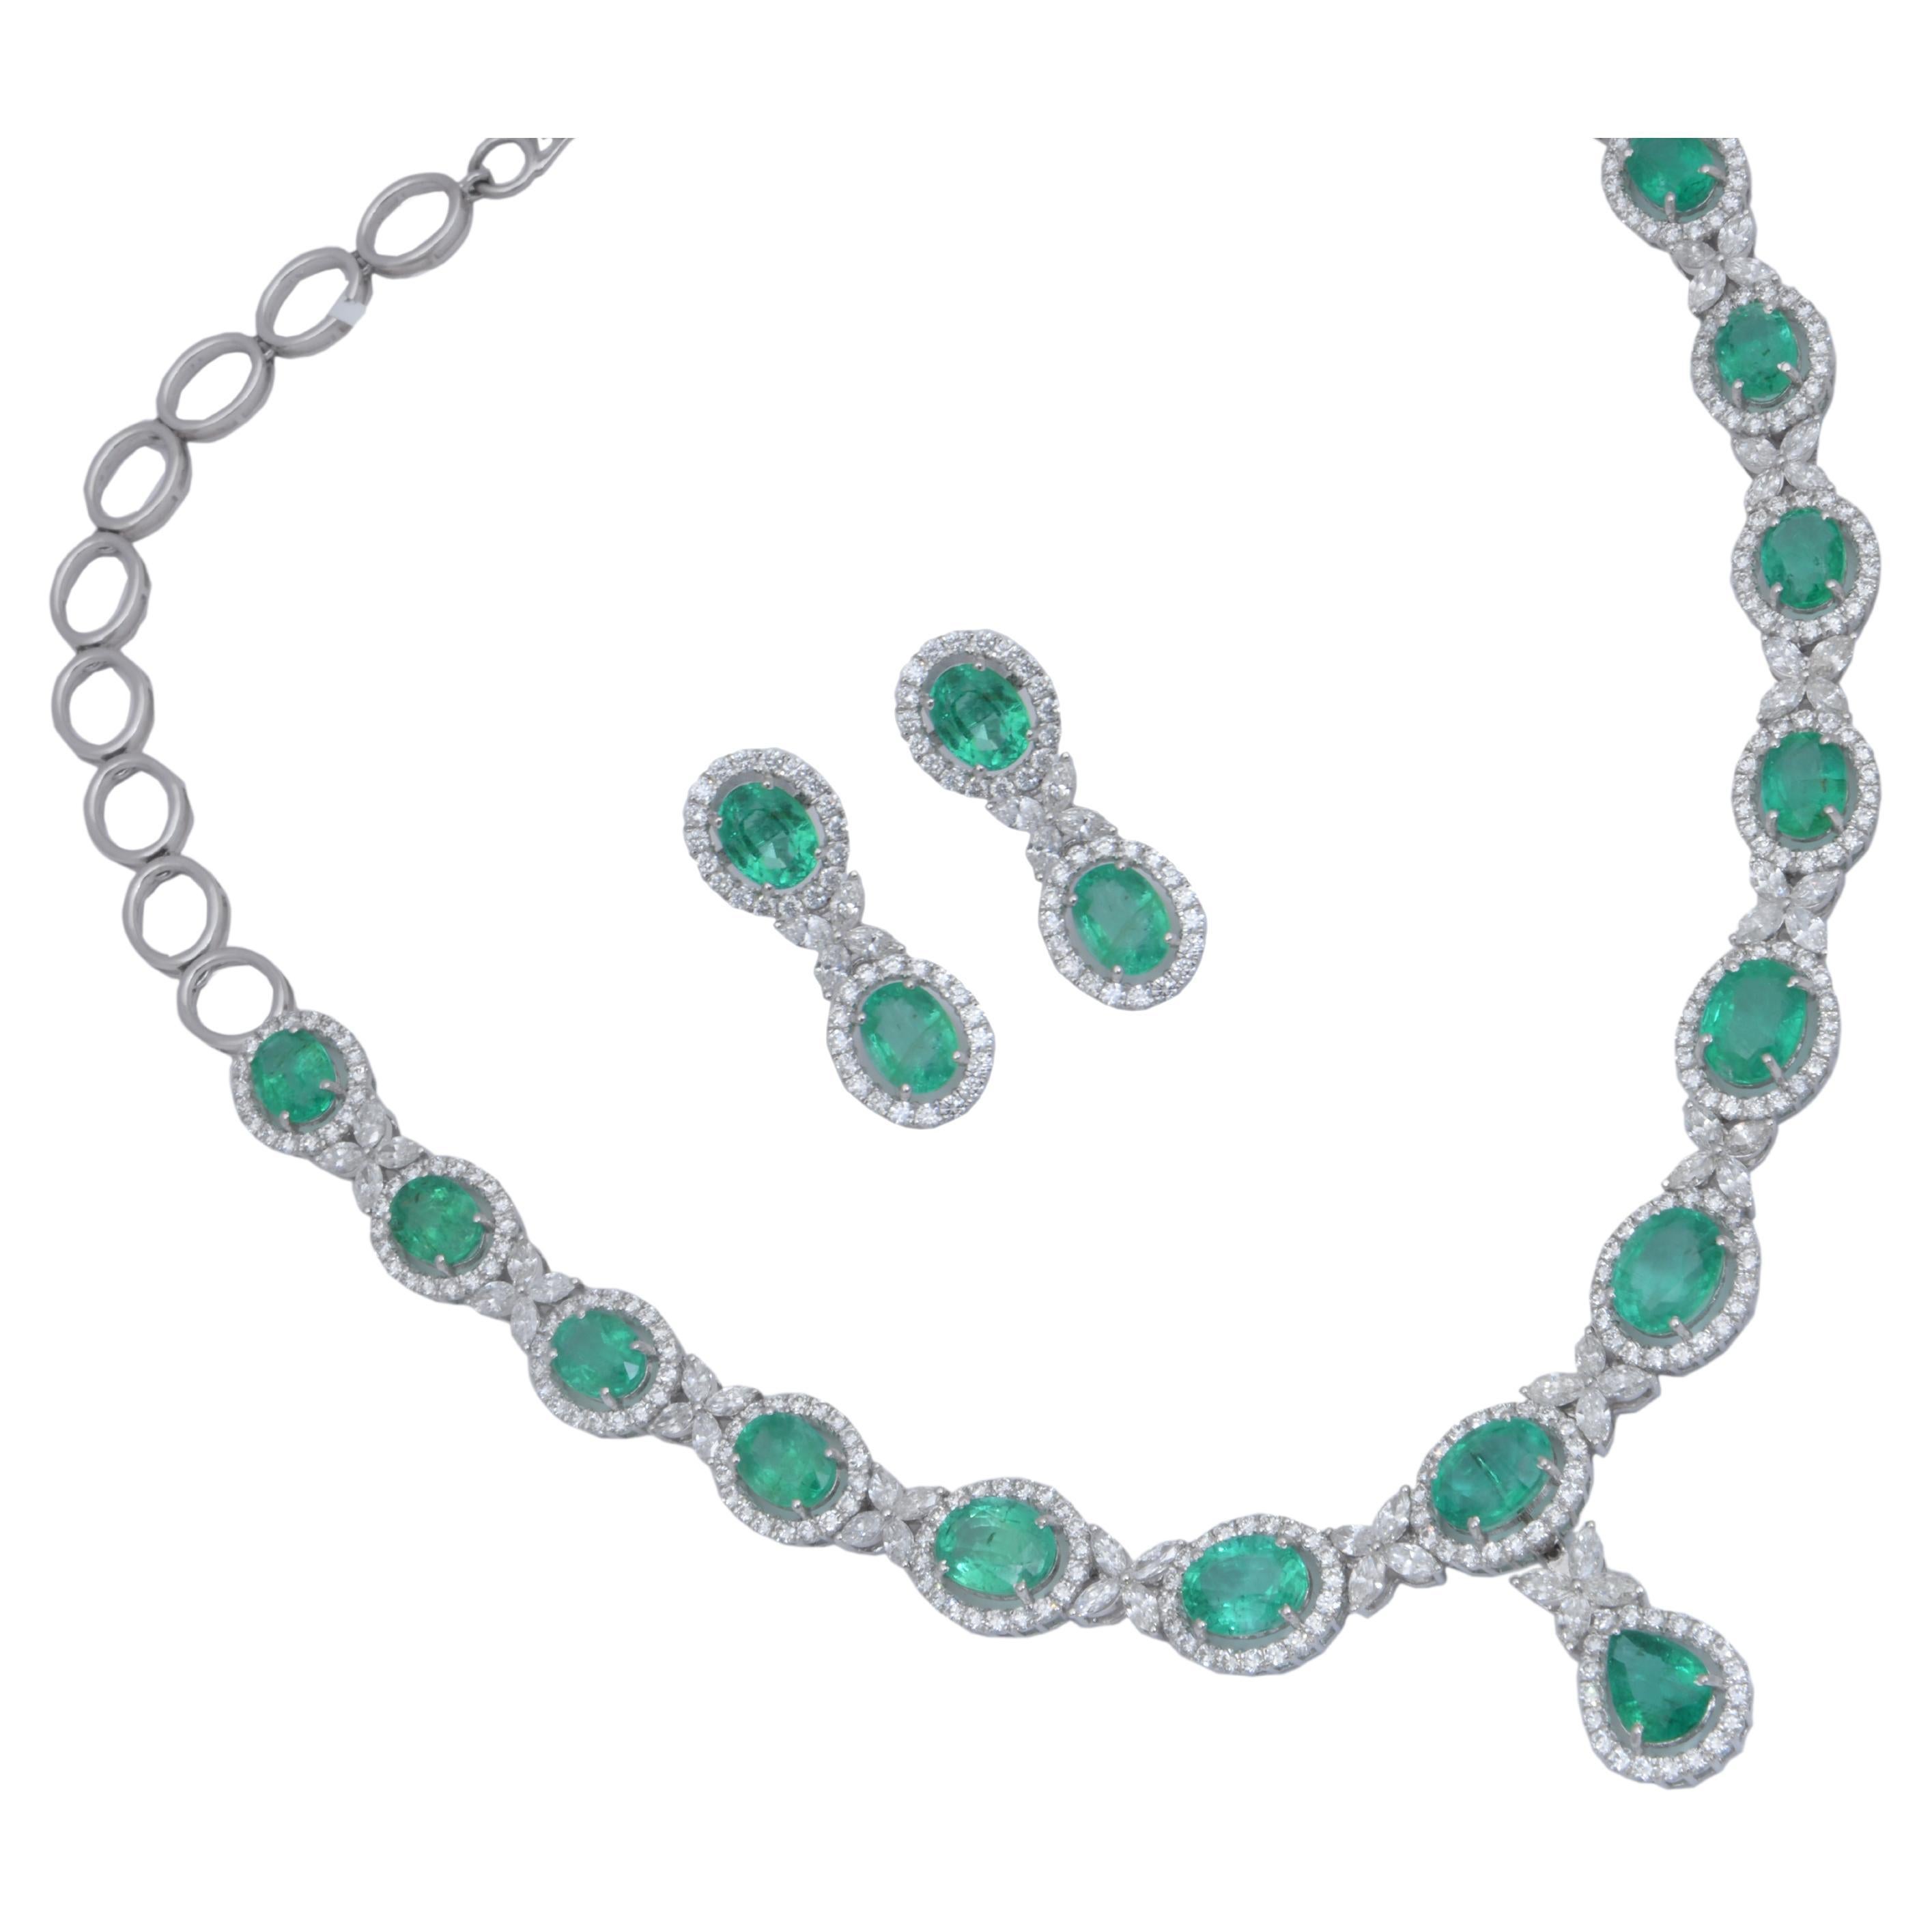 Natural Diamond 11.29 Carats and Zambian Emeralds 28.17 Carats Necklace in 14k 